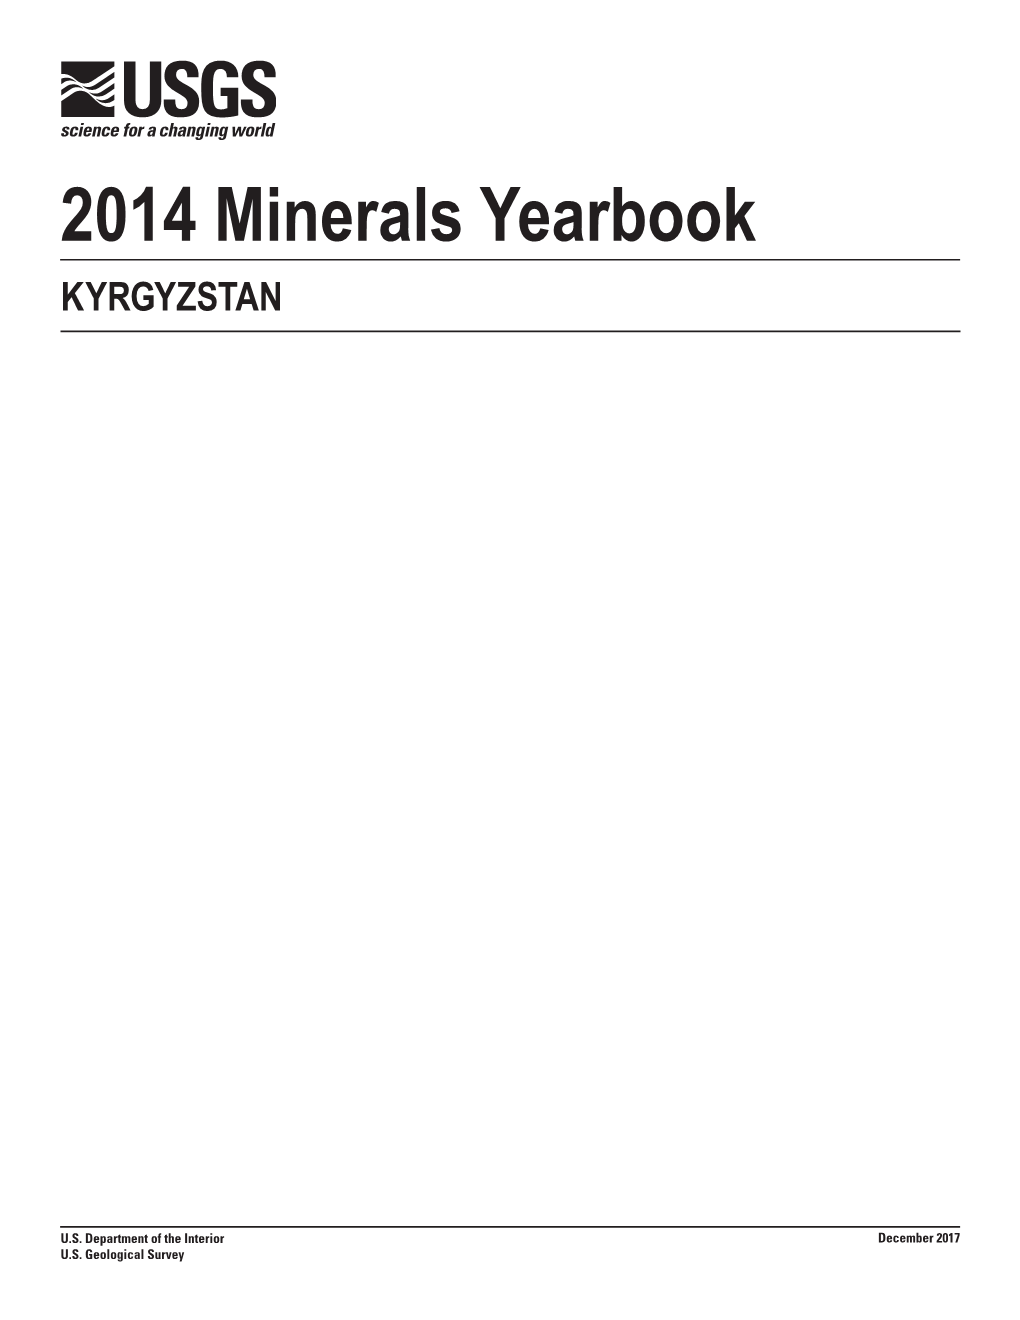 The Mineral Industry of Kyrgyzstan in 2014